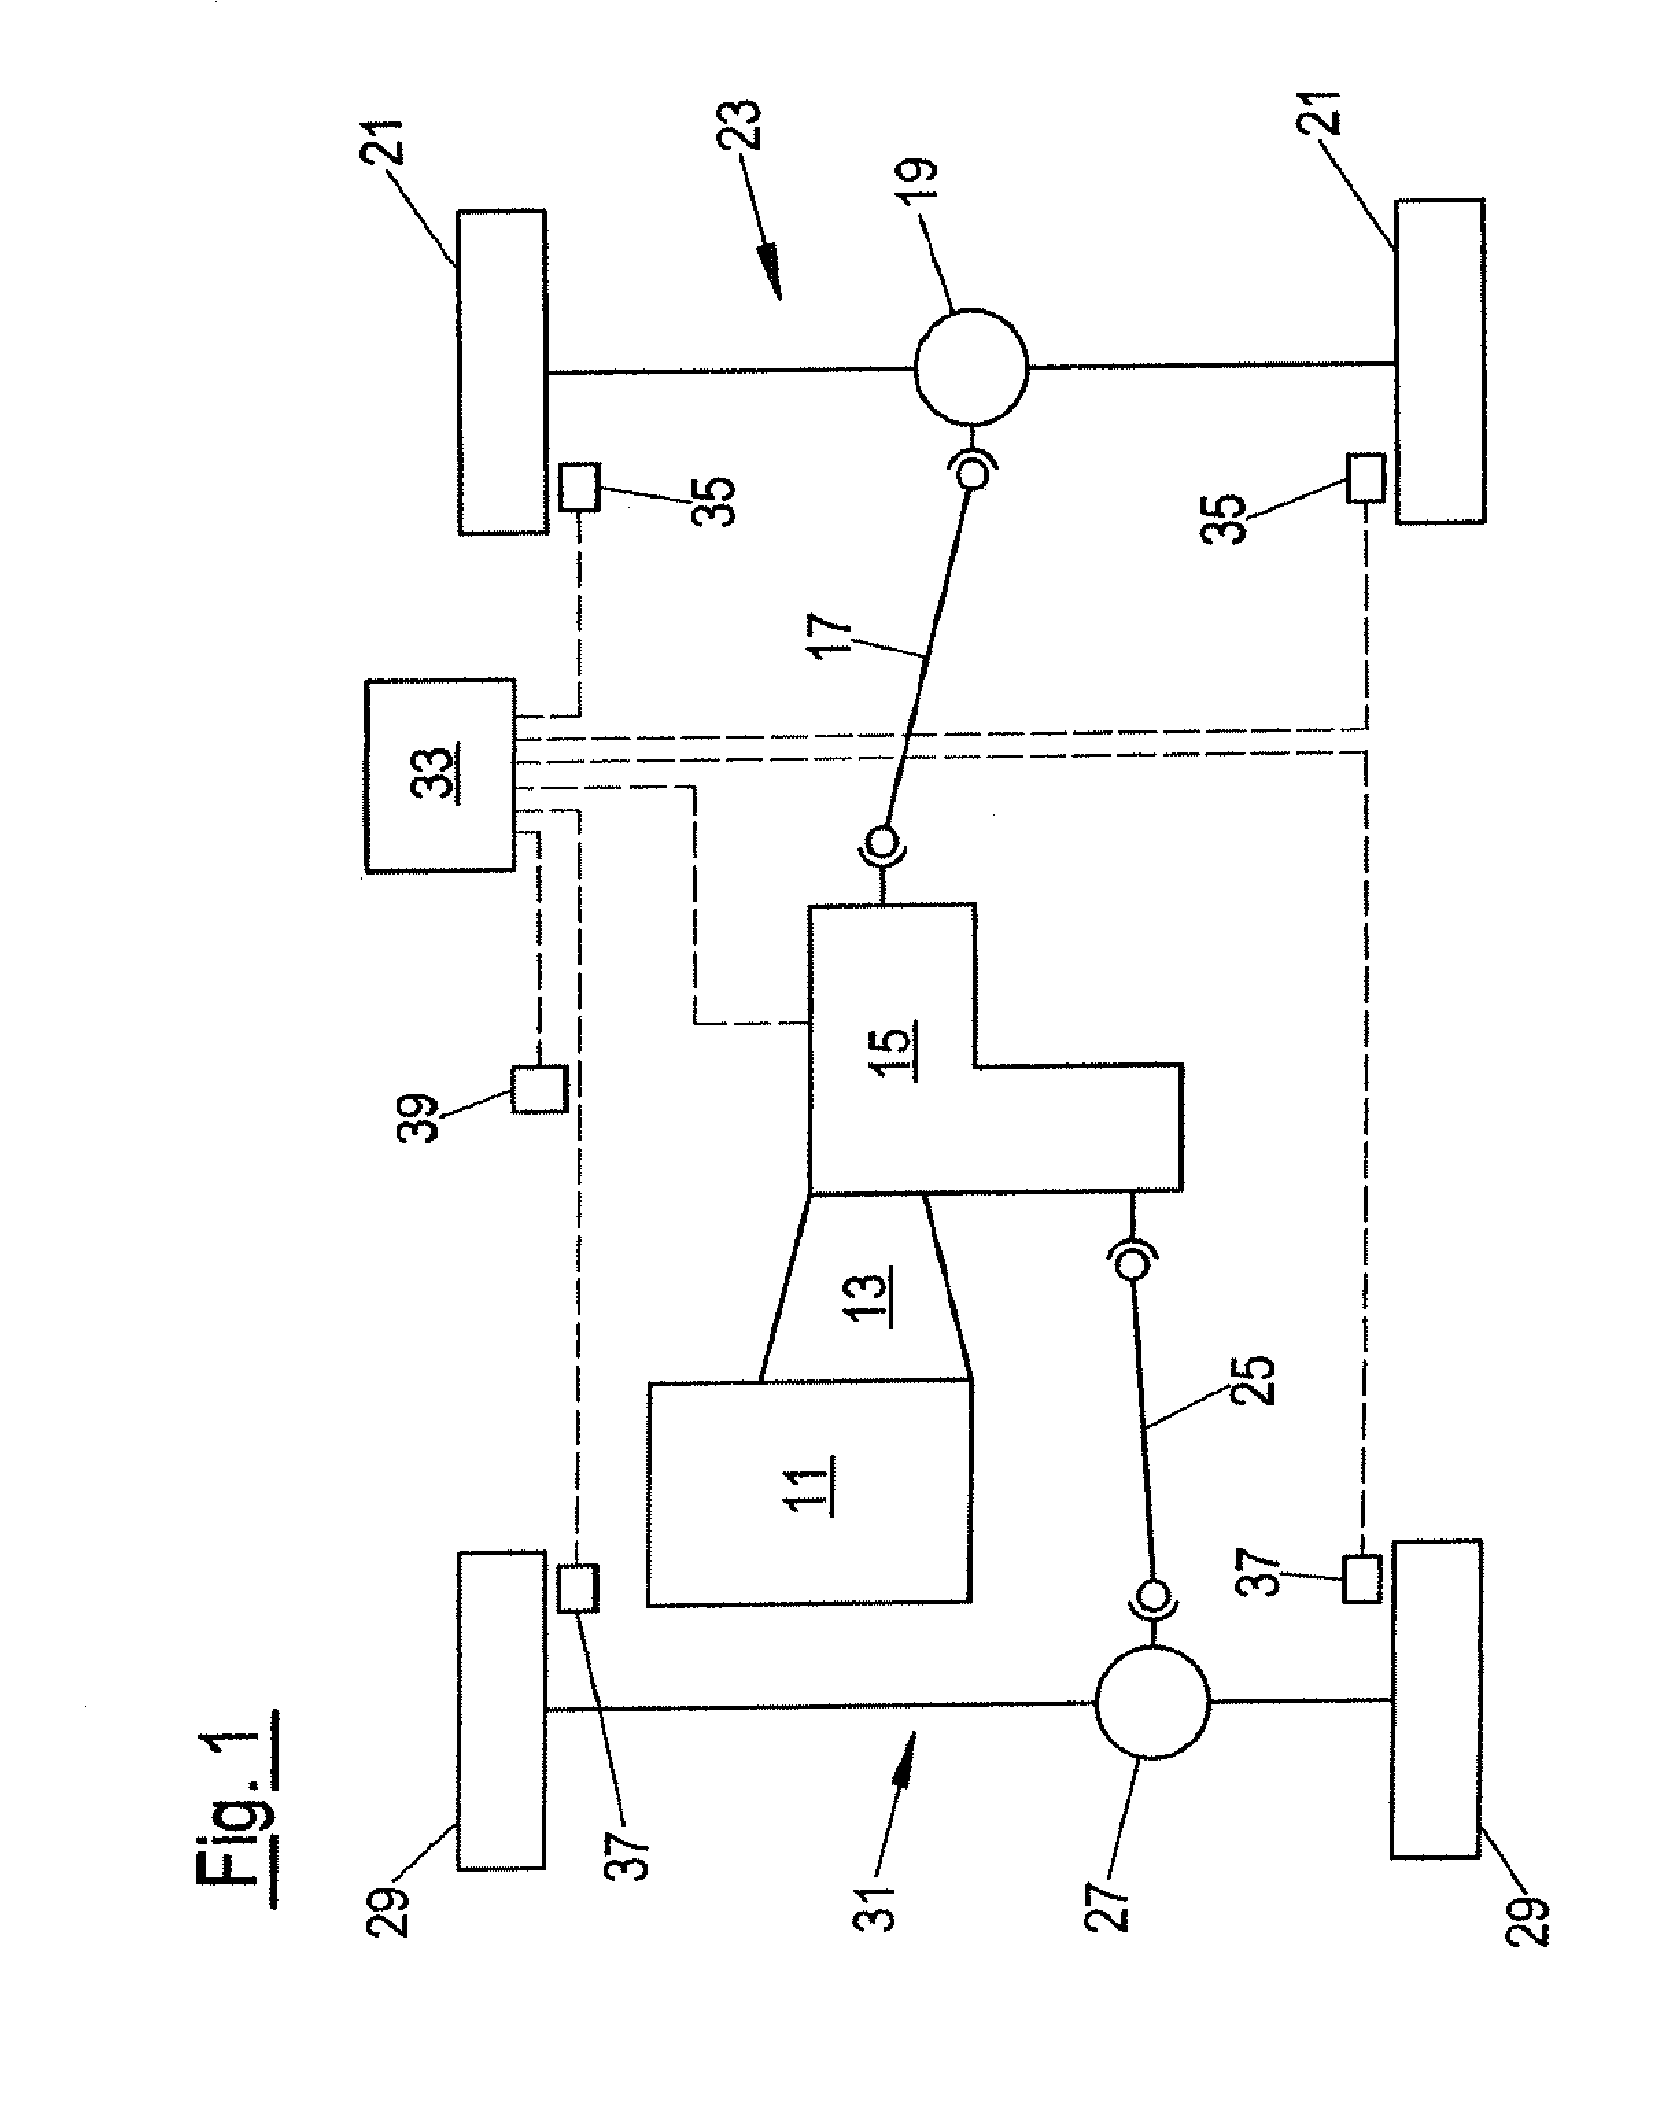 Method for classifying a clutch unit